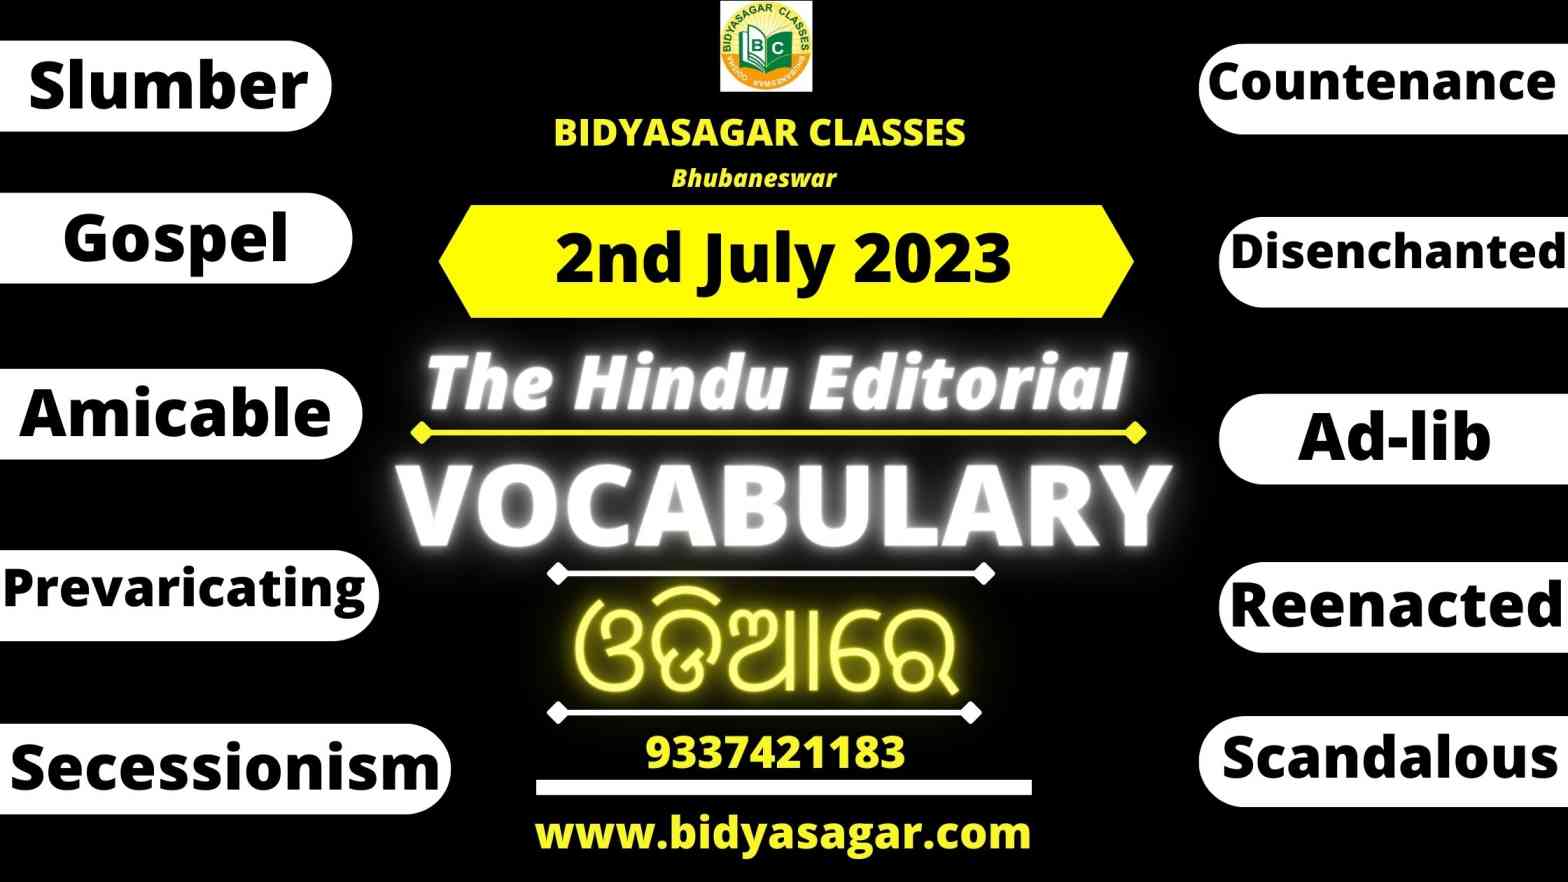 The Hindu Editorial Vocabulary of 2nd July 2023